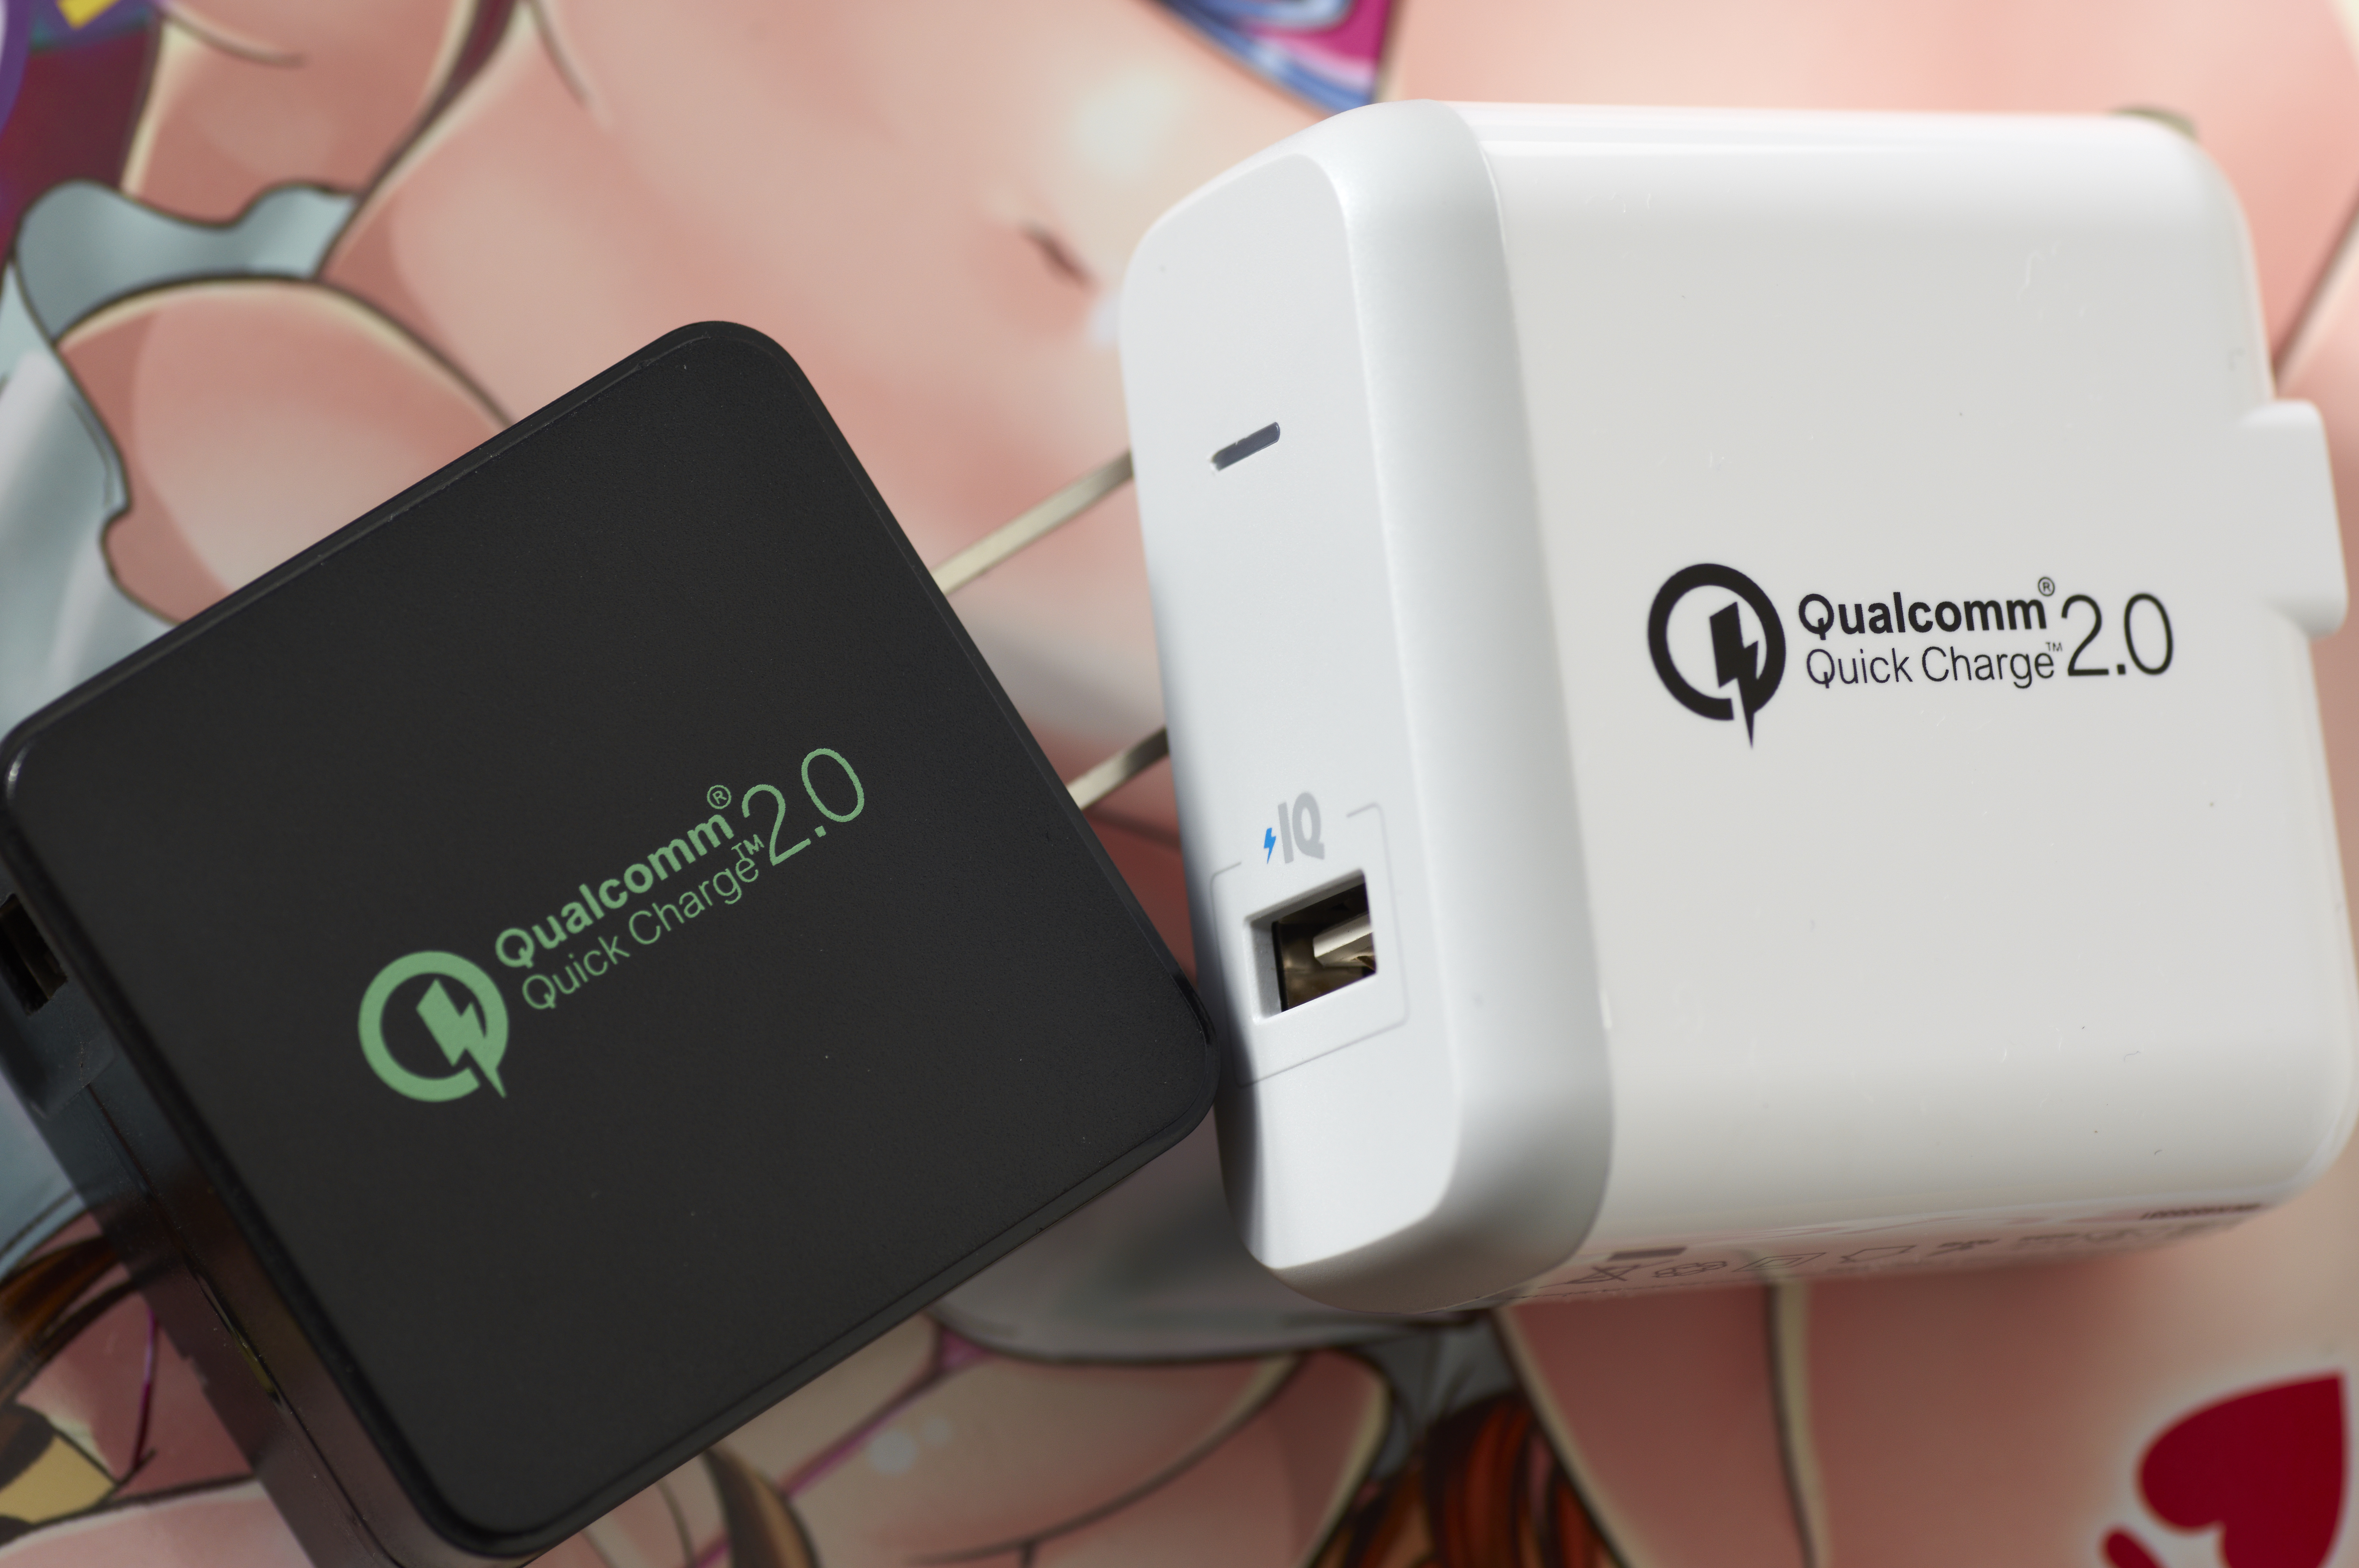 Cargador Belkin Qualcomm® Quick Charge™ 3.0 + cable Androi